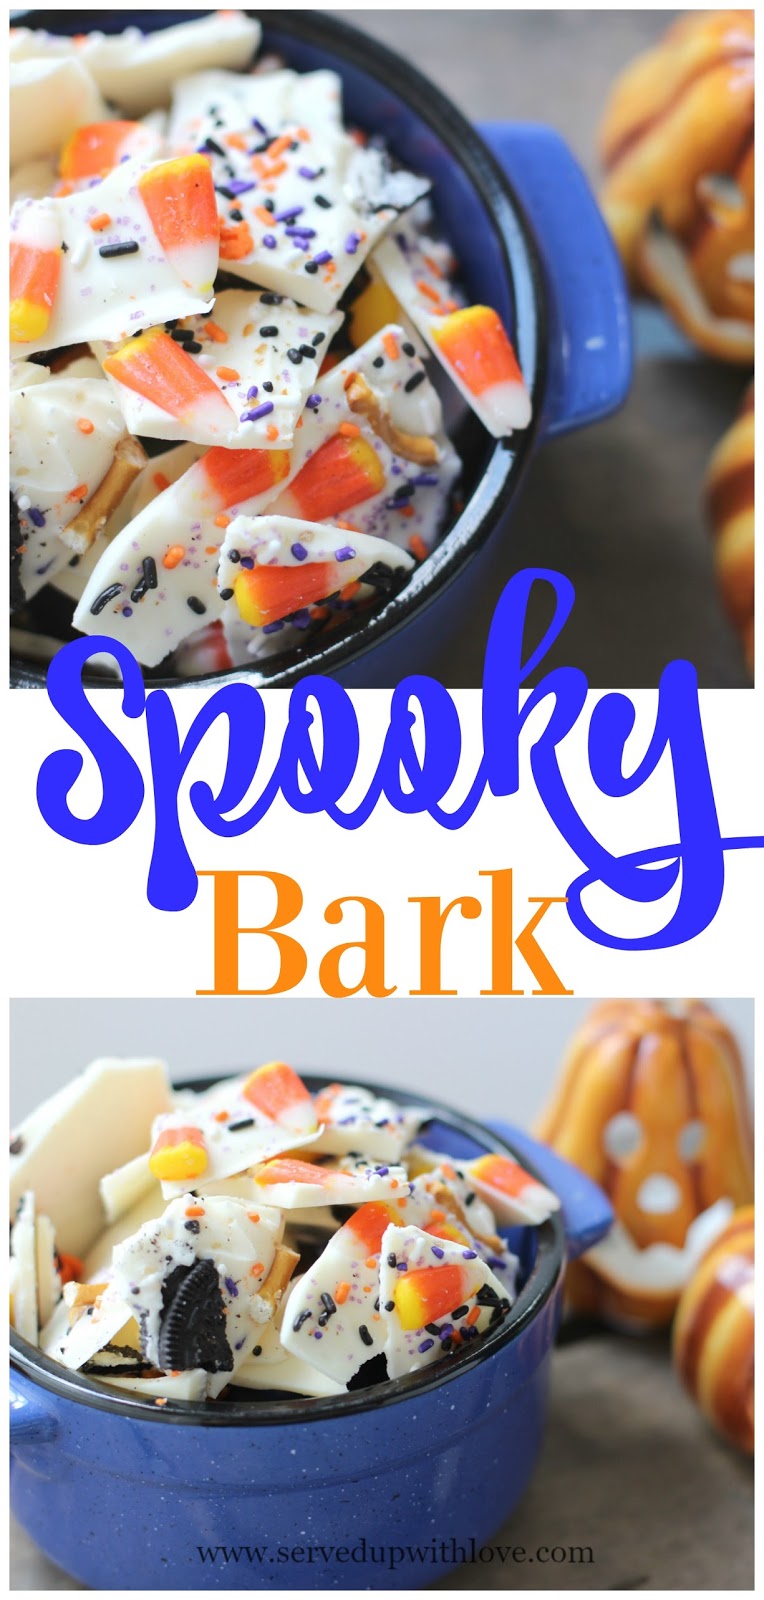 Served Up With Love: Spooky Bark